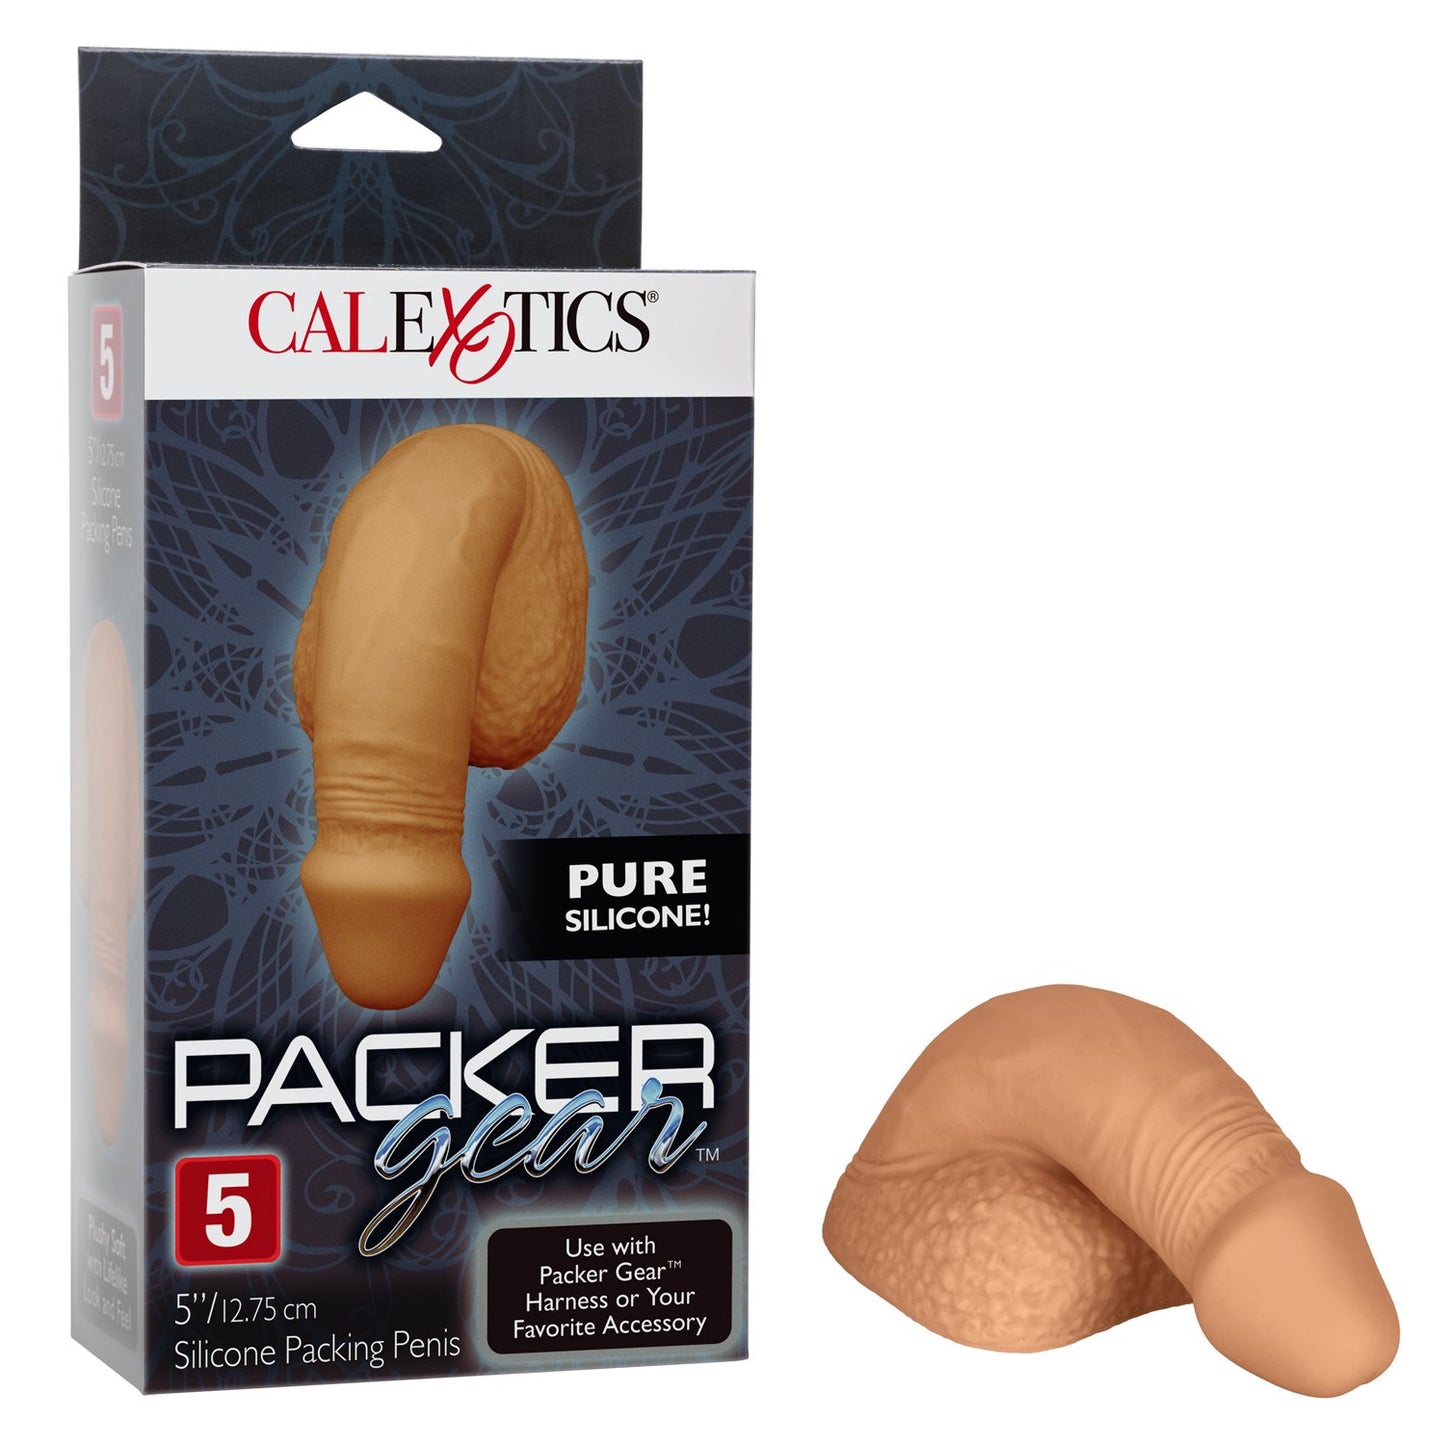 Packer Gear™ 5''/12.75 cm Silicone Packing Penis™